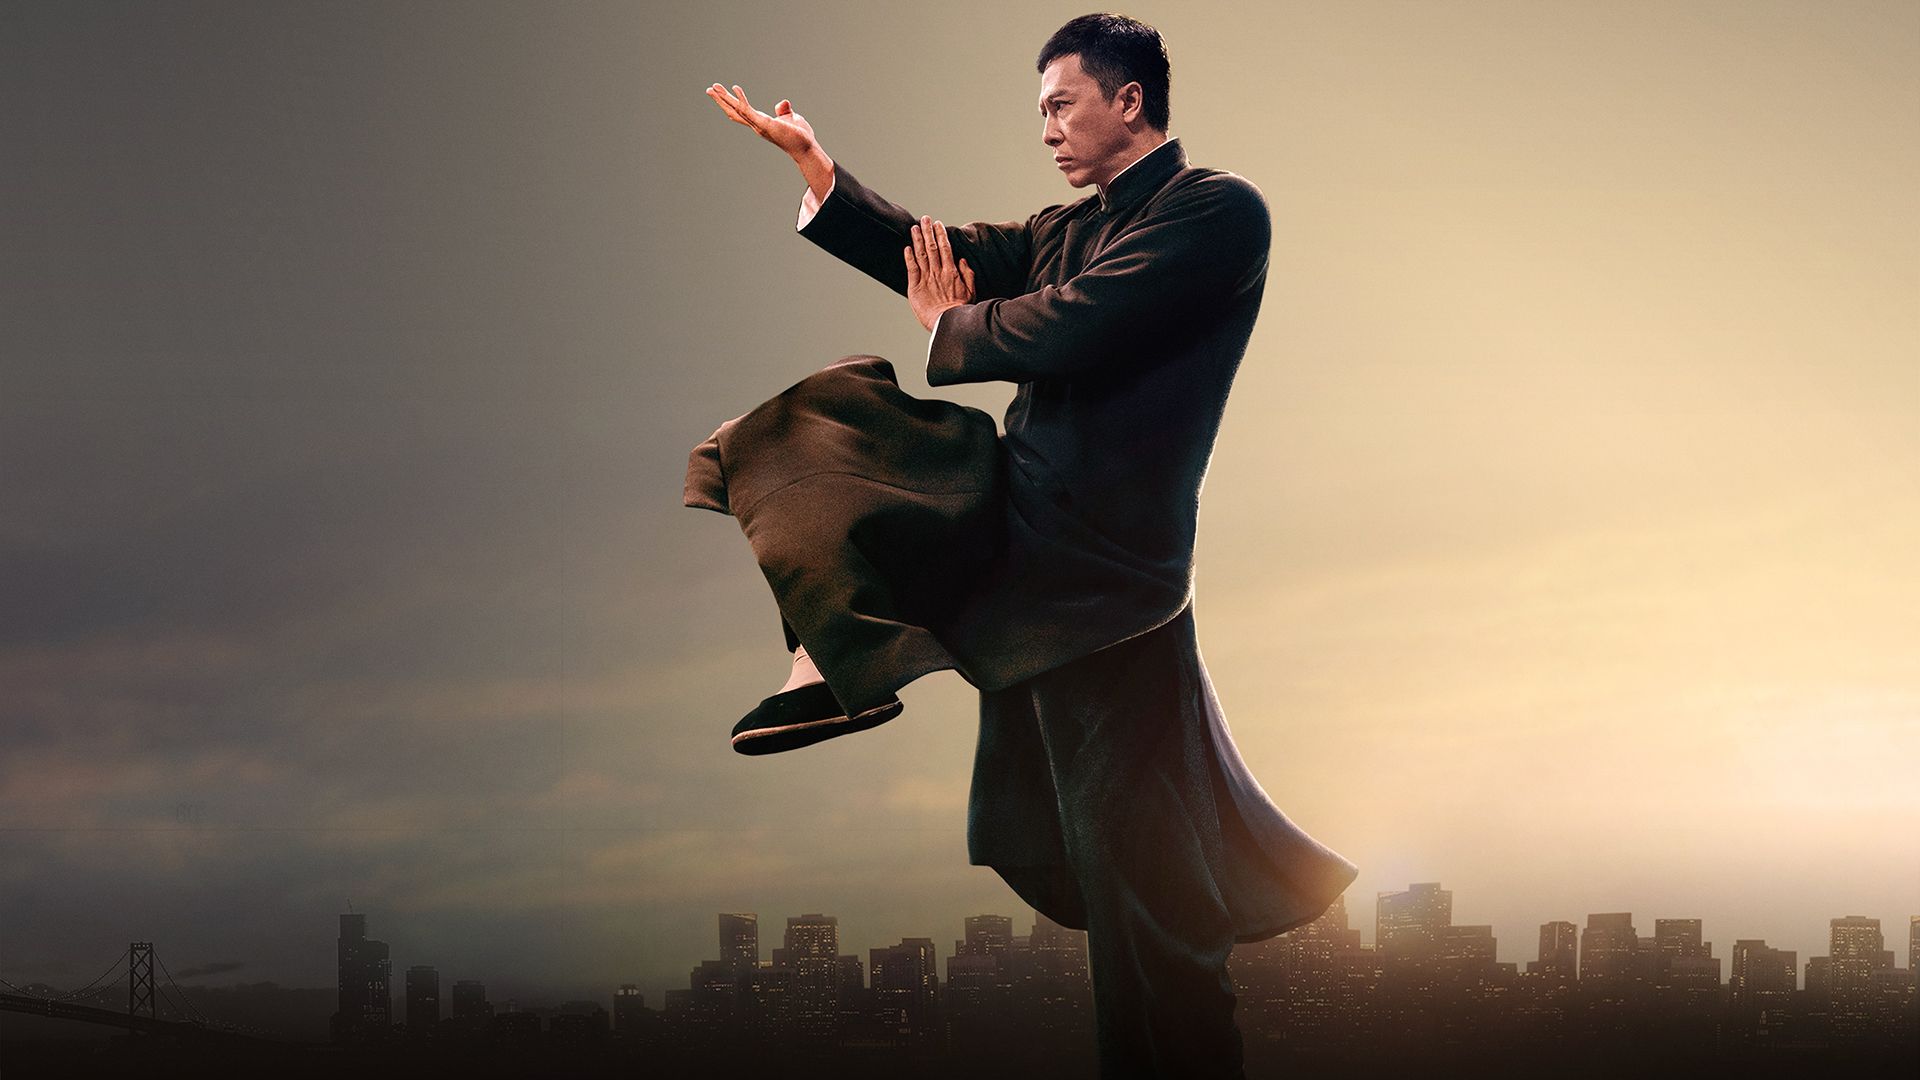 Ip Man 4: The Finale background